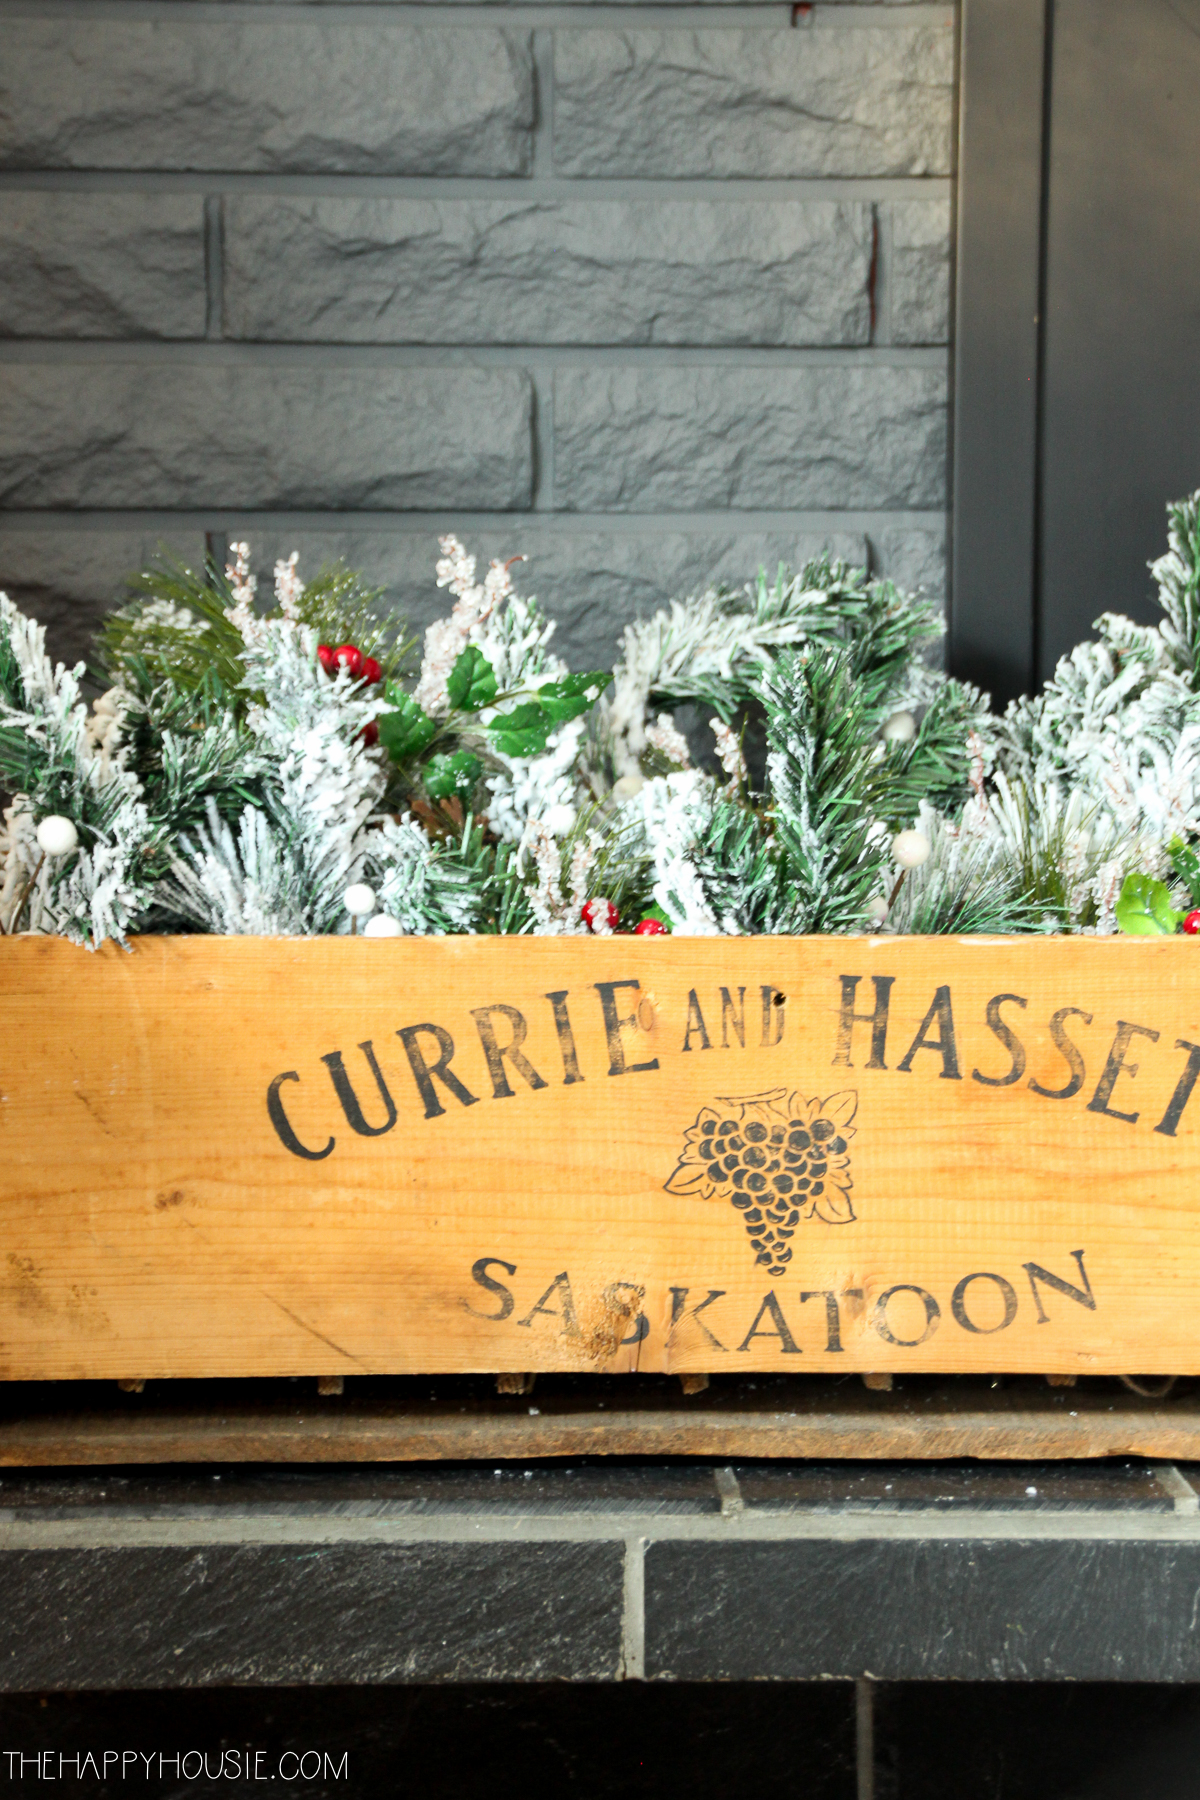 There is a Saskatoon wooden crate with greenery in it on the mantel.